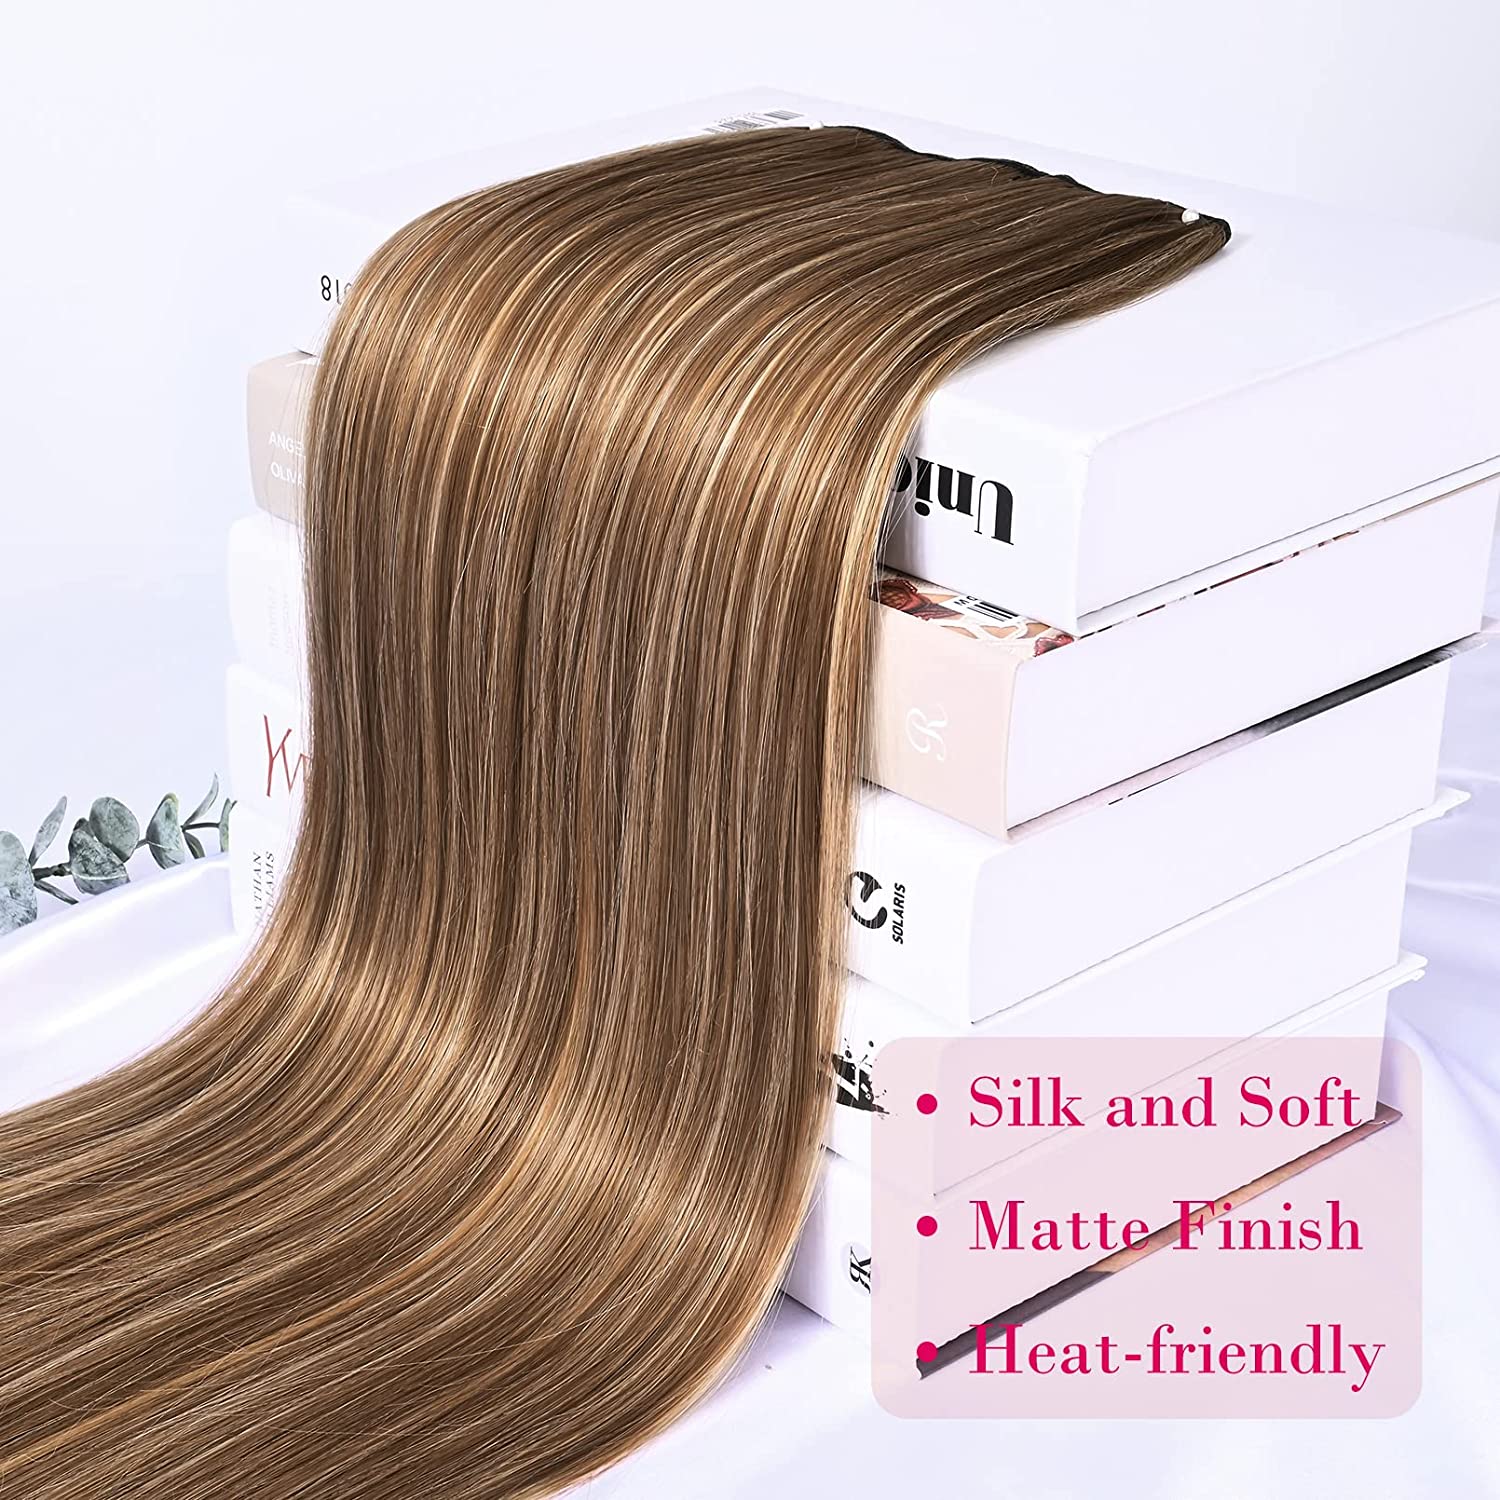 REECHO Straight Clips in hair extensions Clips on Hairpieces Synthetic Hair Extensions for Women 5 Clips per Piece